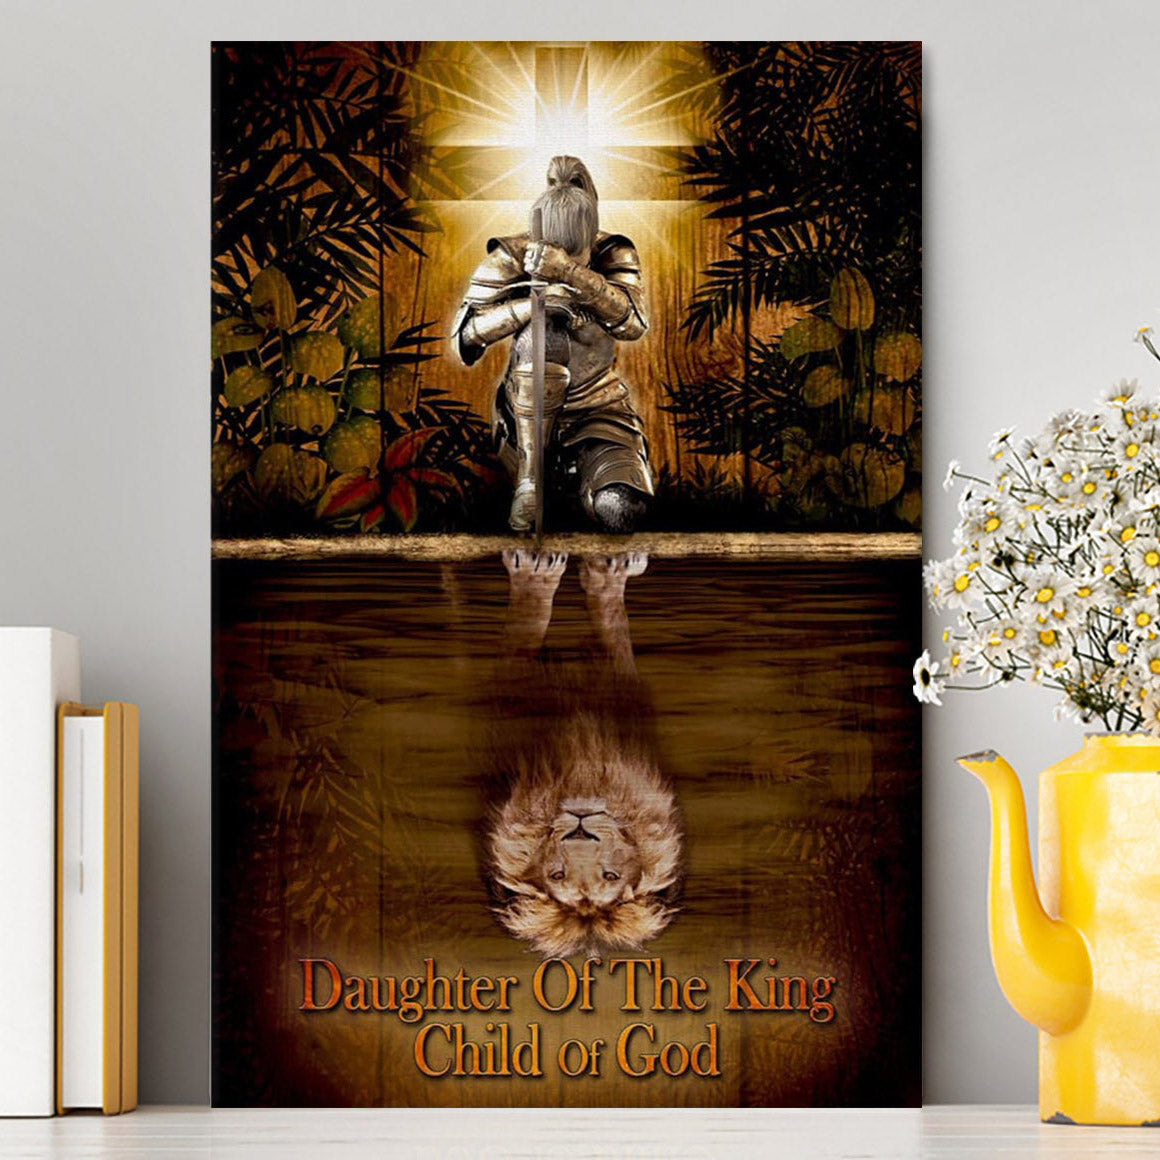 Female Warrior Daughter Of A King Child Of God Canvas Wall Art - Christian Canvas Prints - Religious Wall Decor